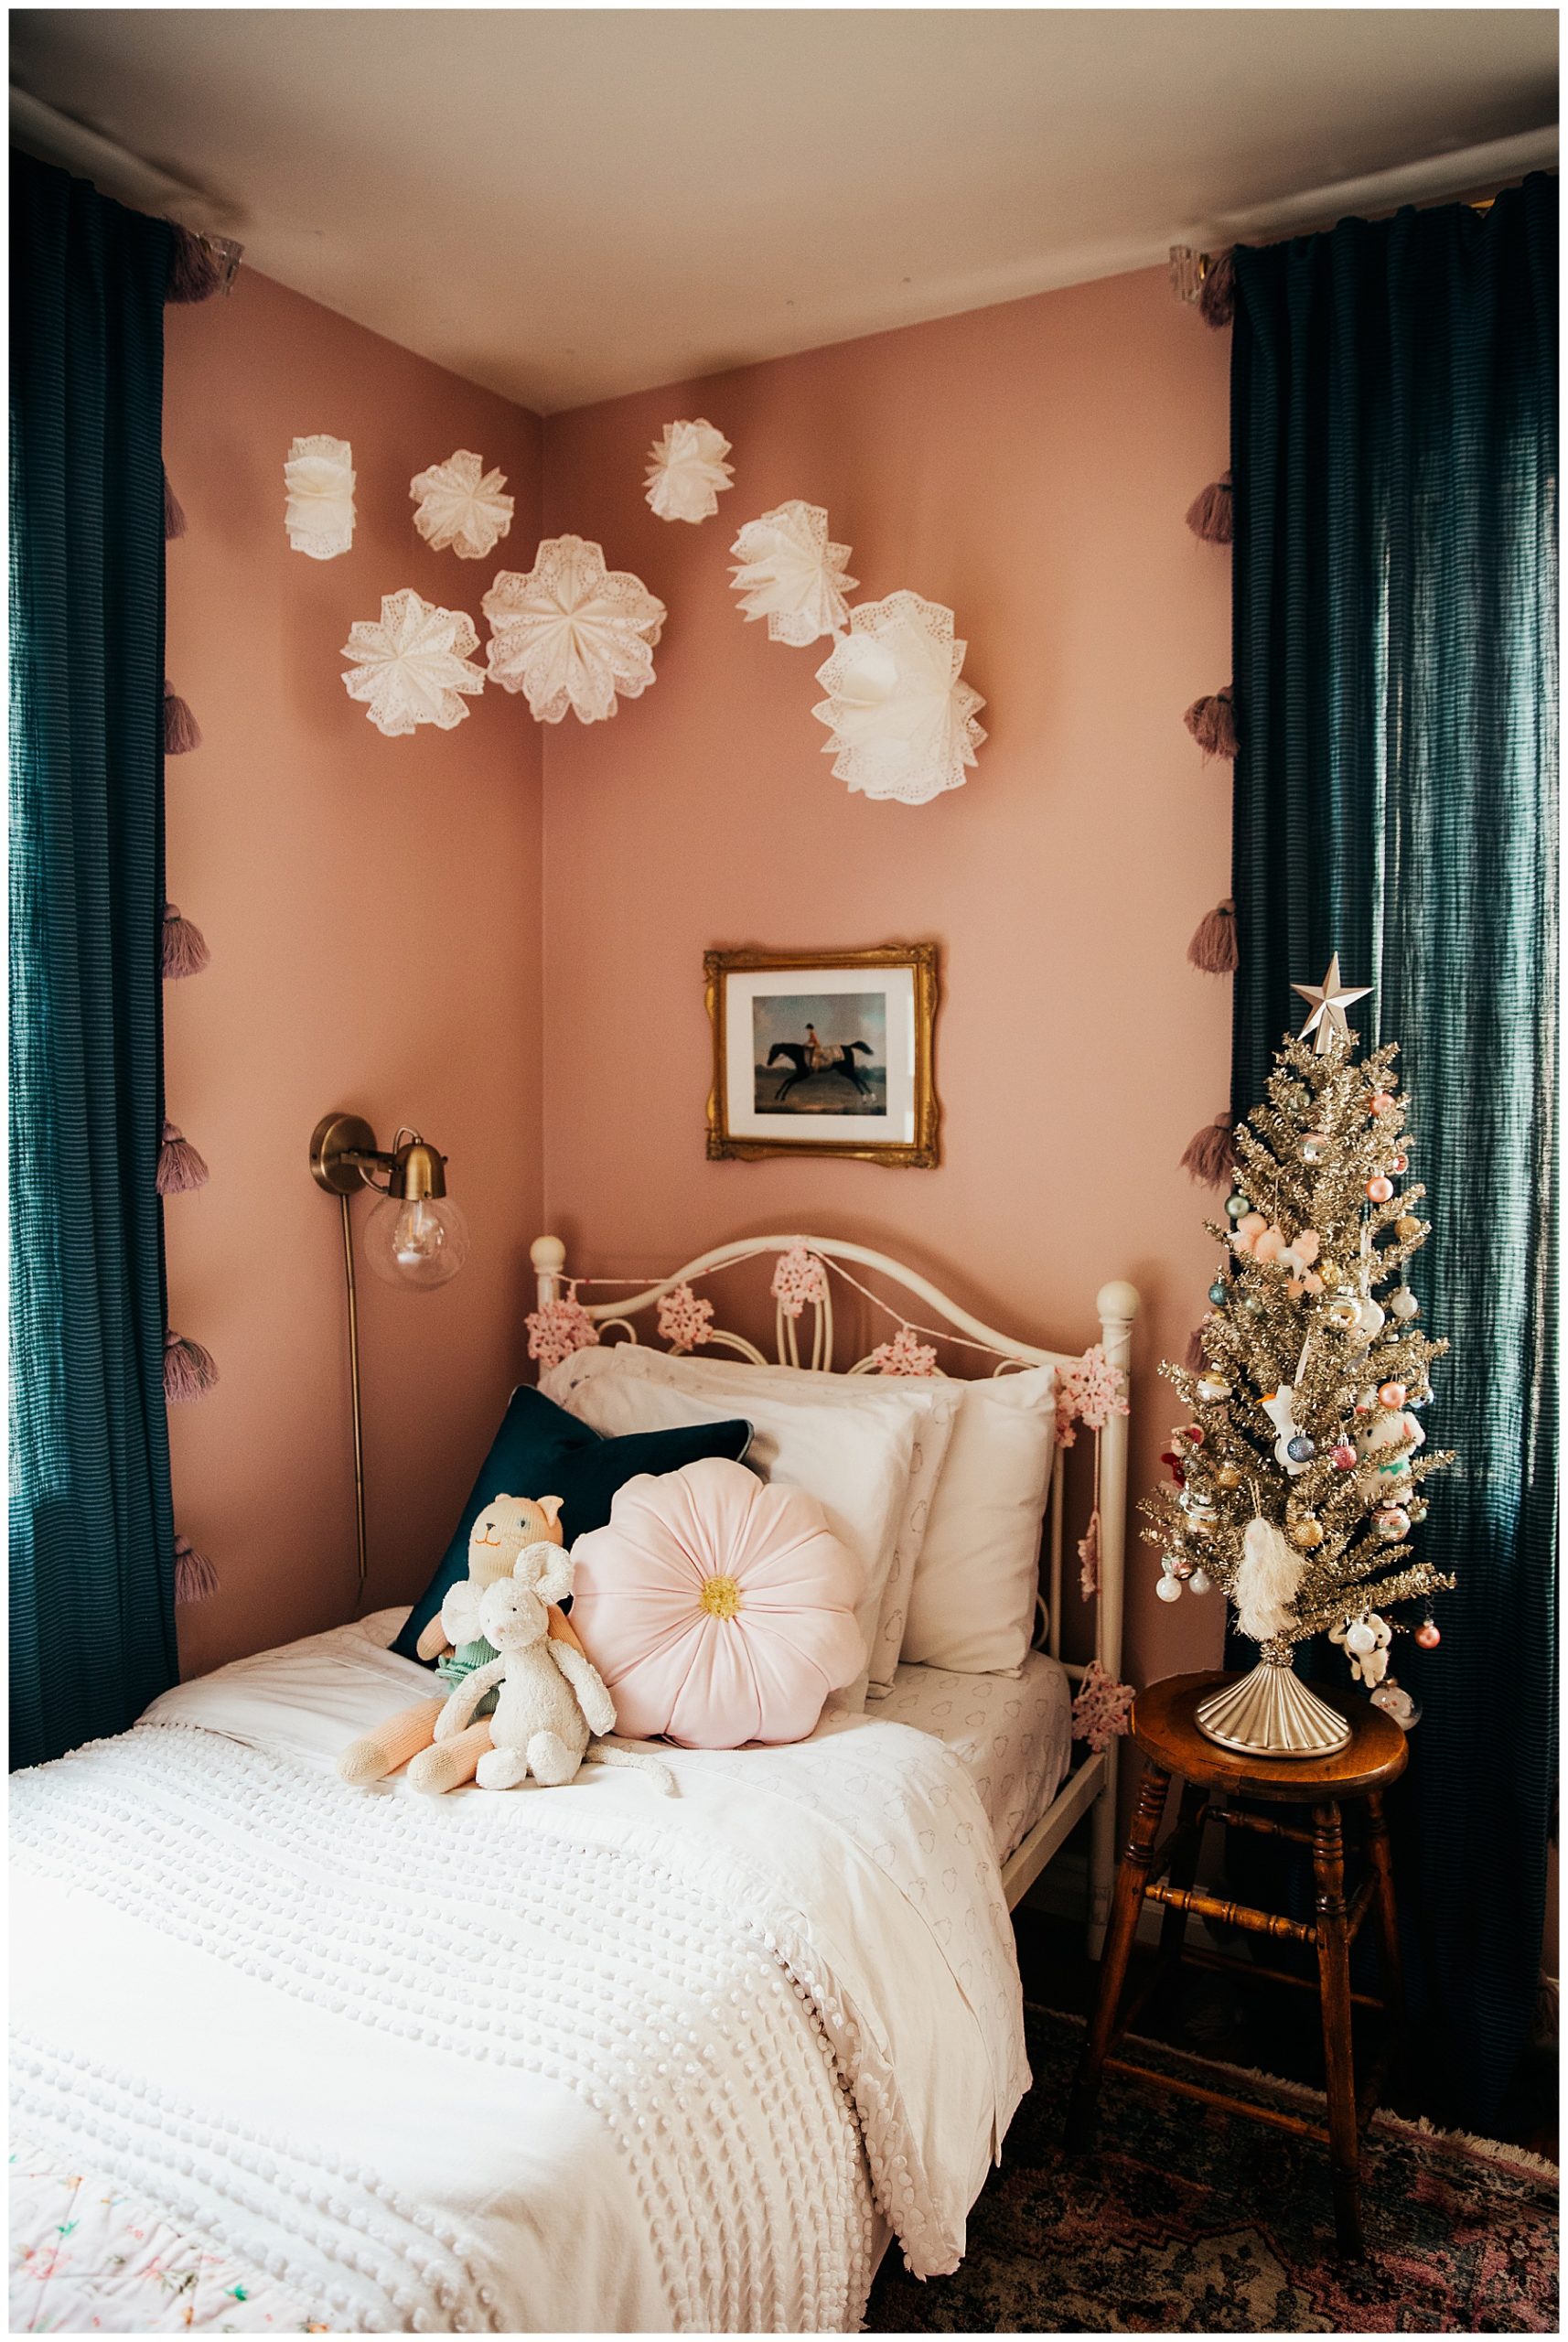 Girls twin bed decorated for Christmas with paper doilies snowflakes hanging above.